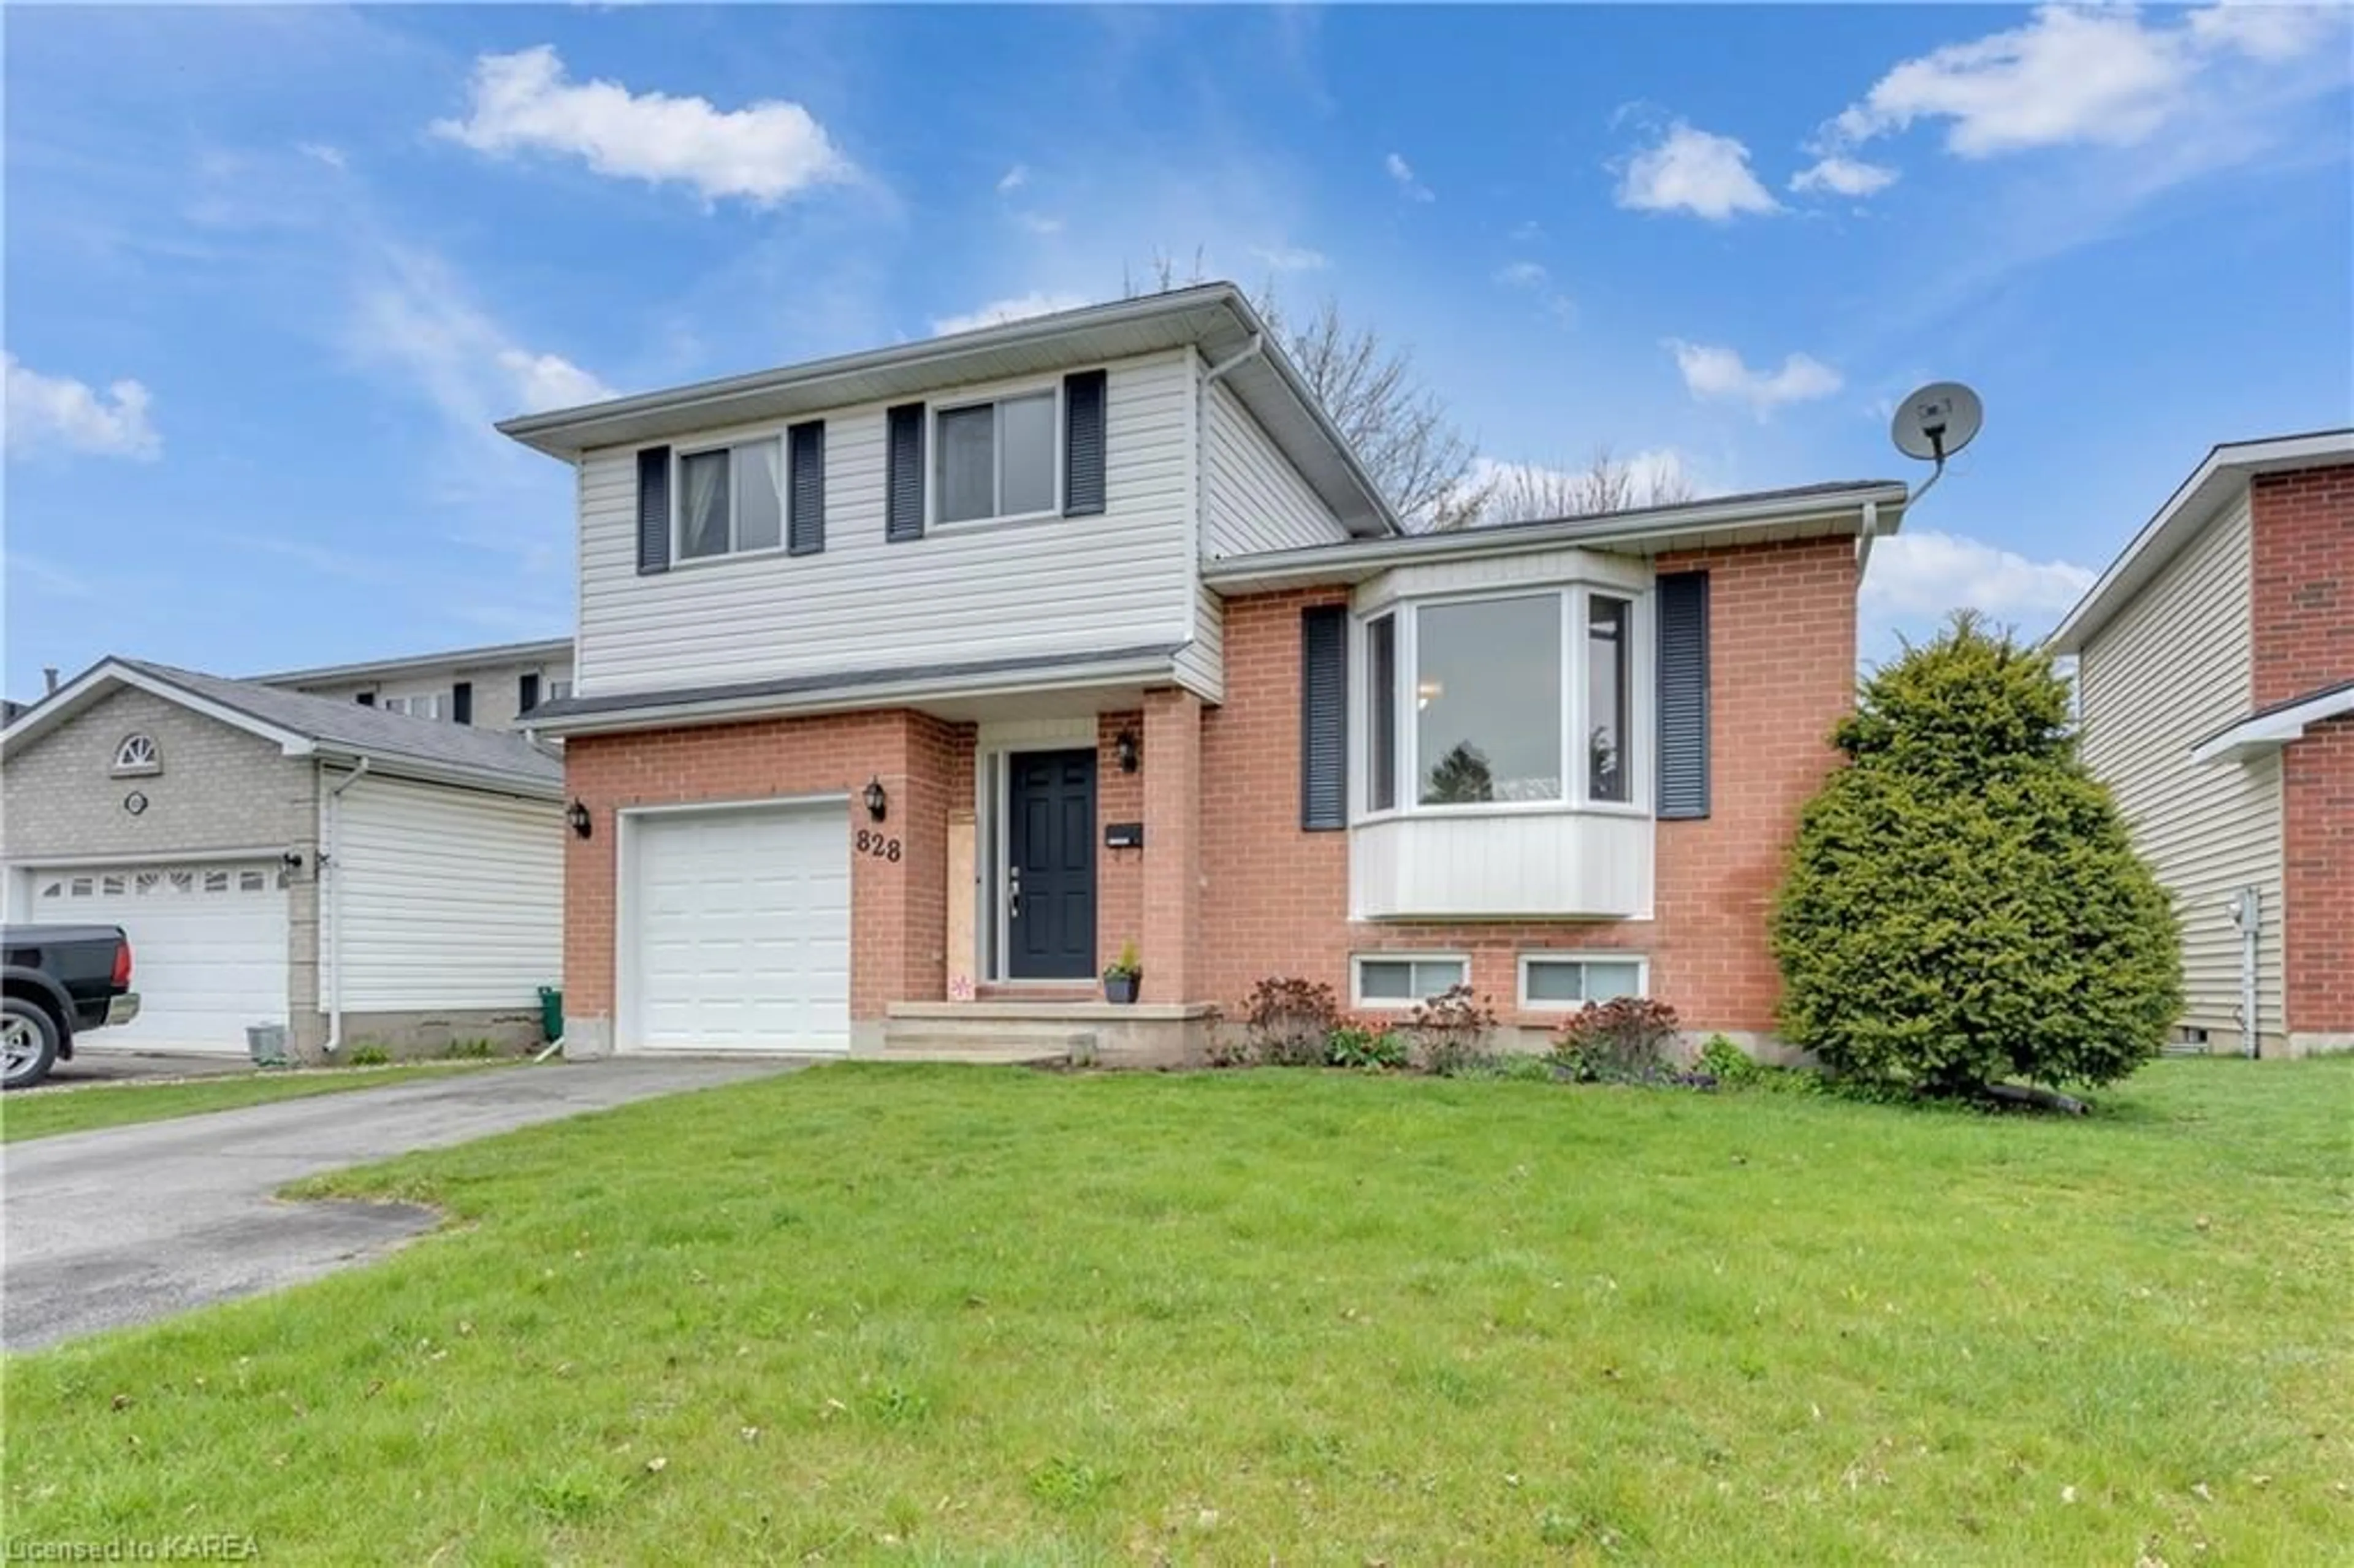 Frontside or backside of a home for 828 Cataraqui Woods Dr, Kingston Ontario K7P 2P7